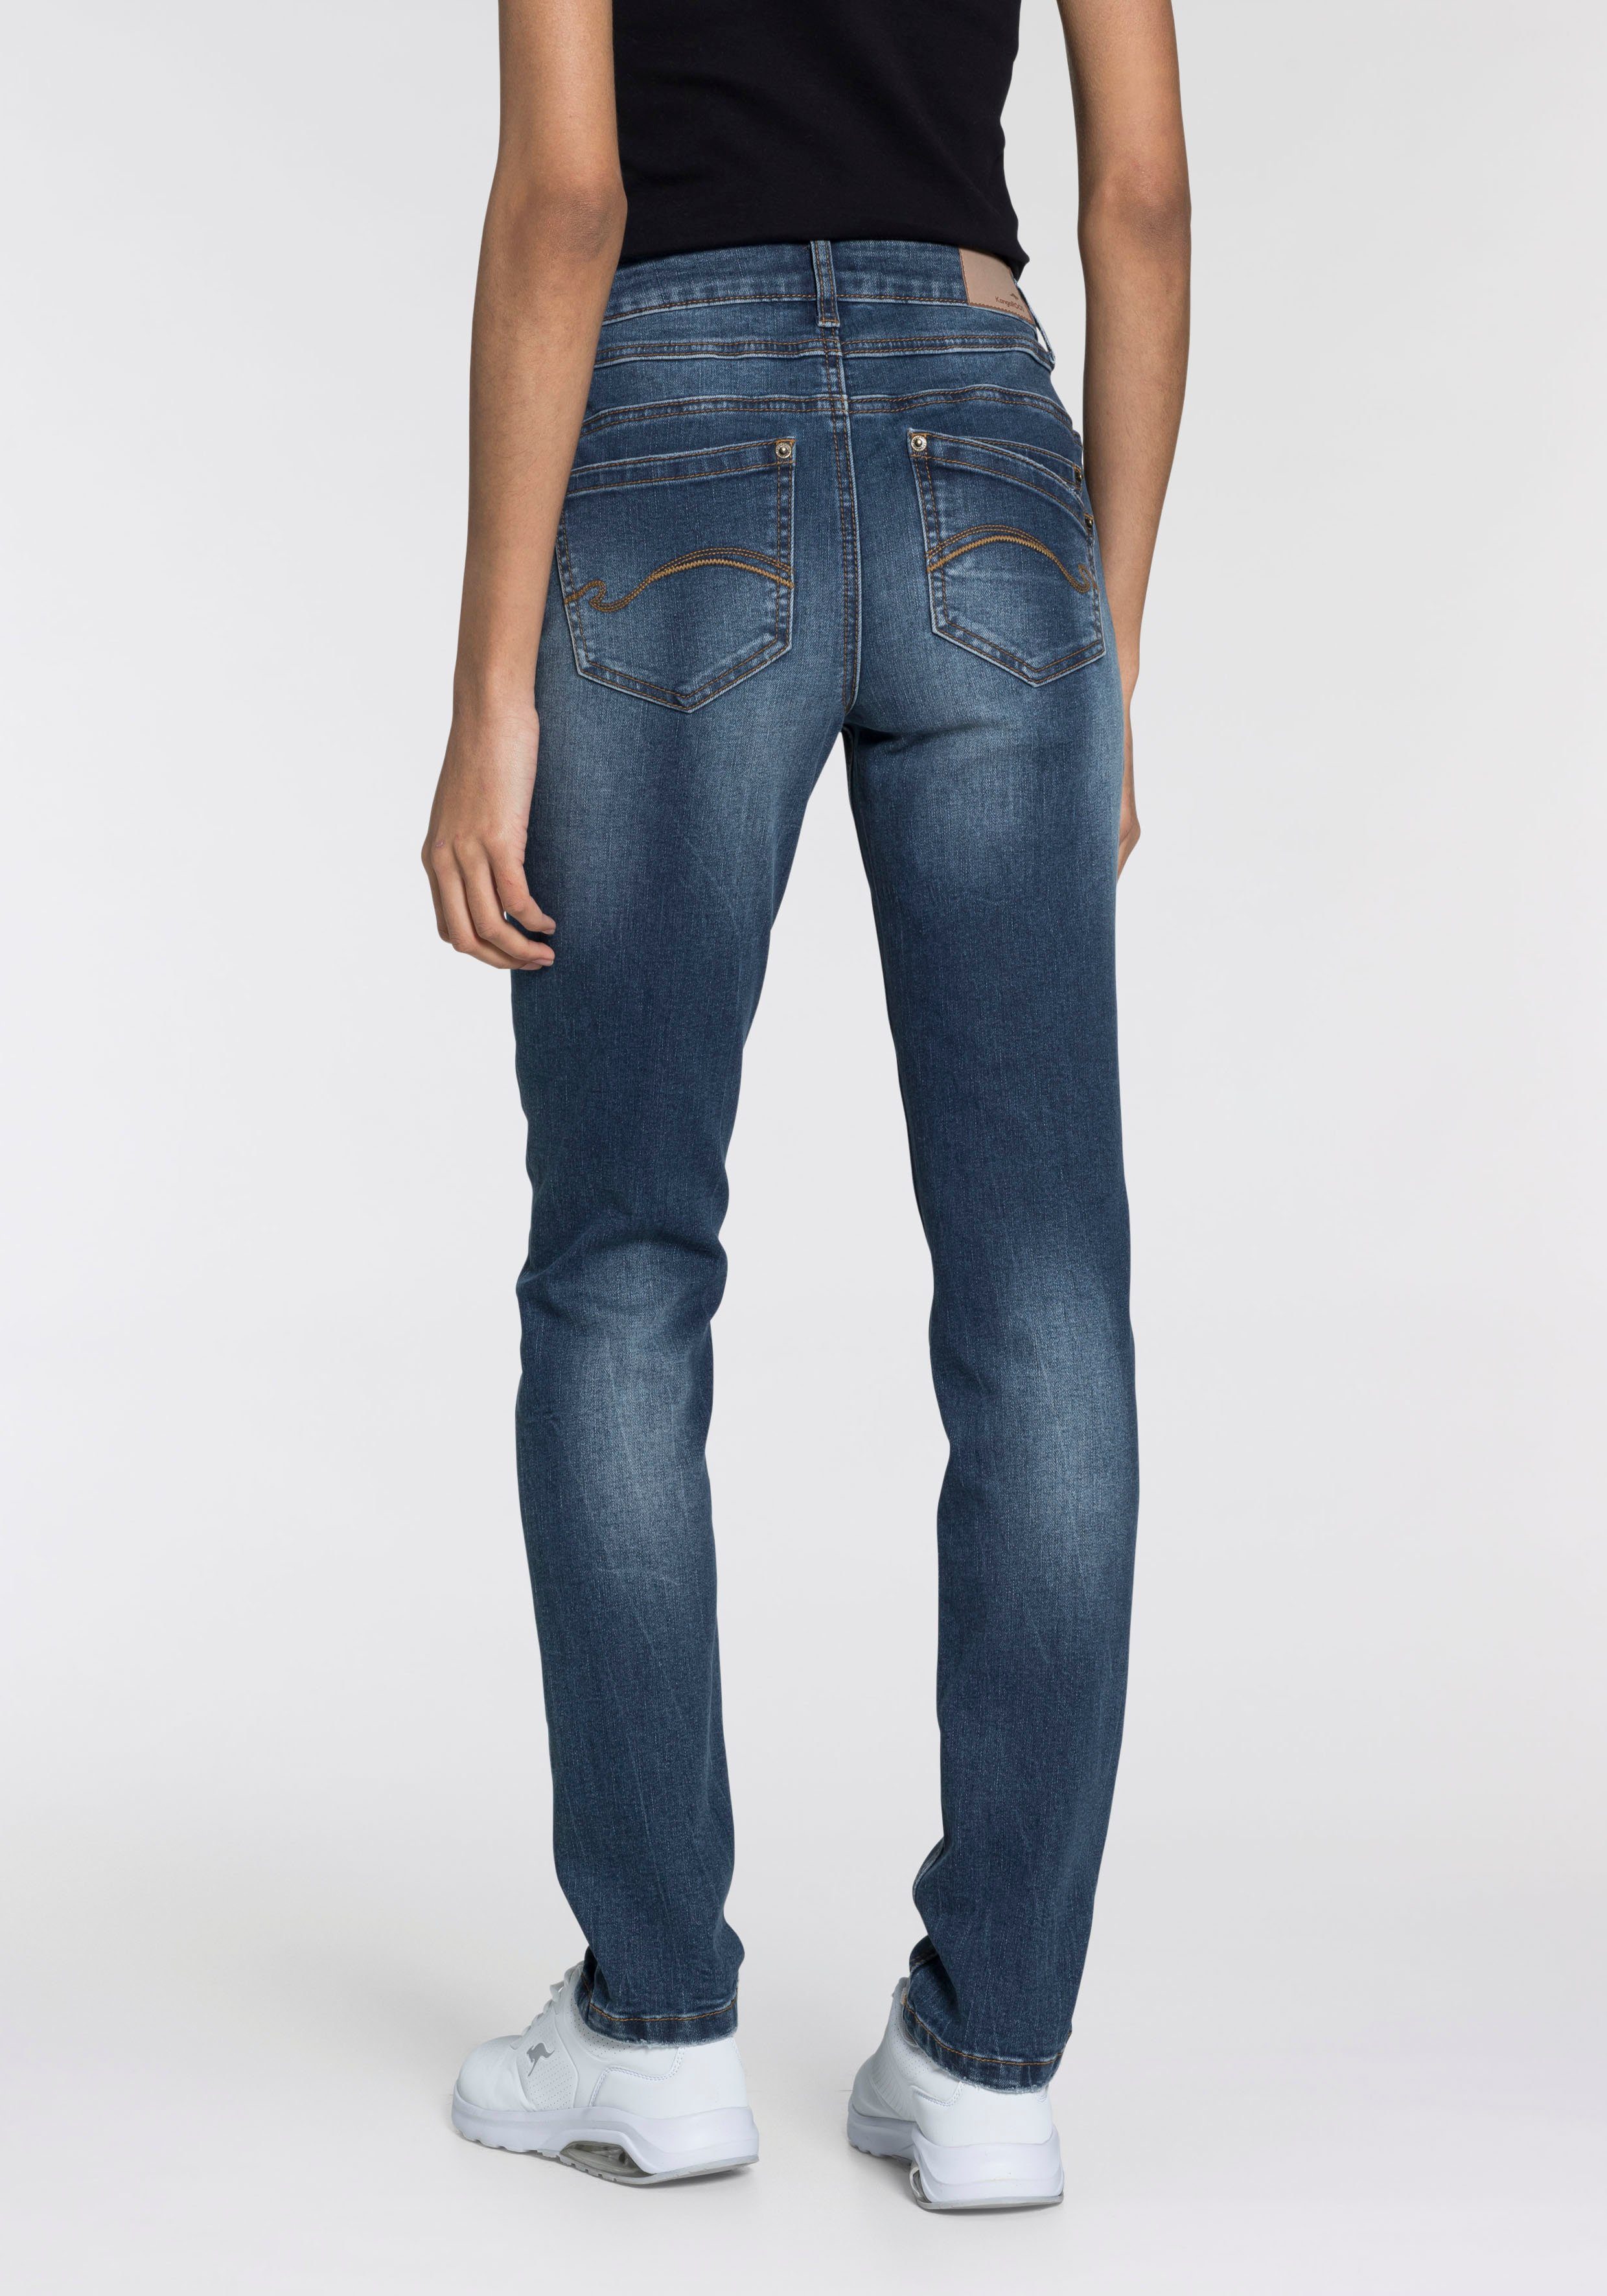 WAIST RELAX-FIT KangaROOS Relax-fit-Jeans HIGH